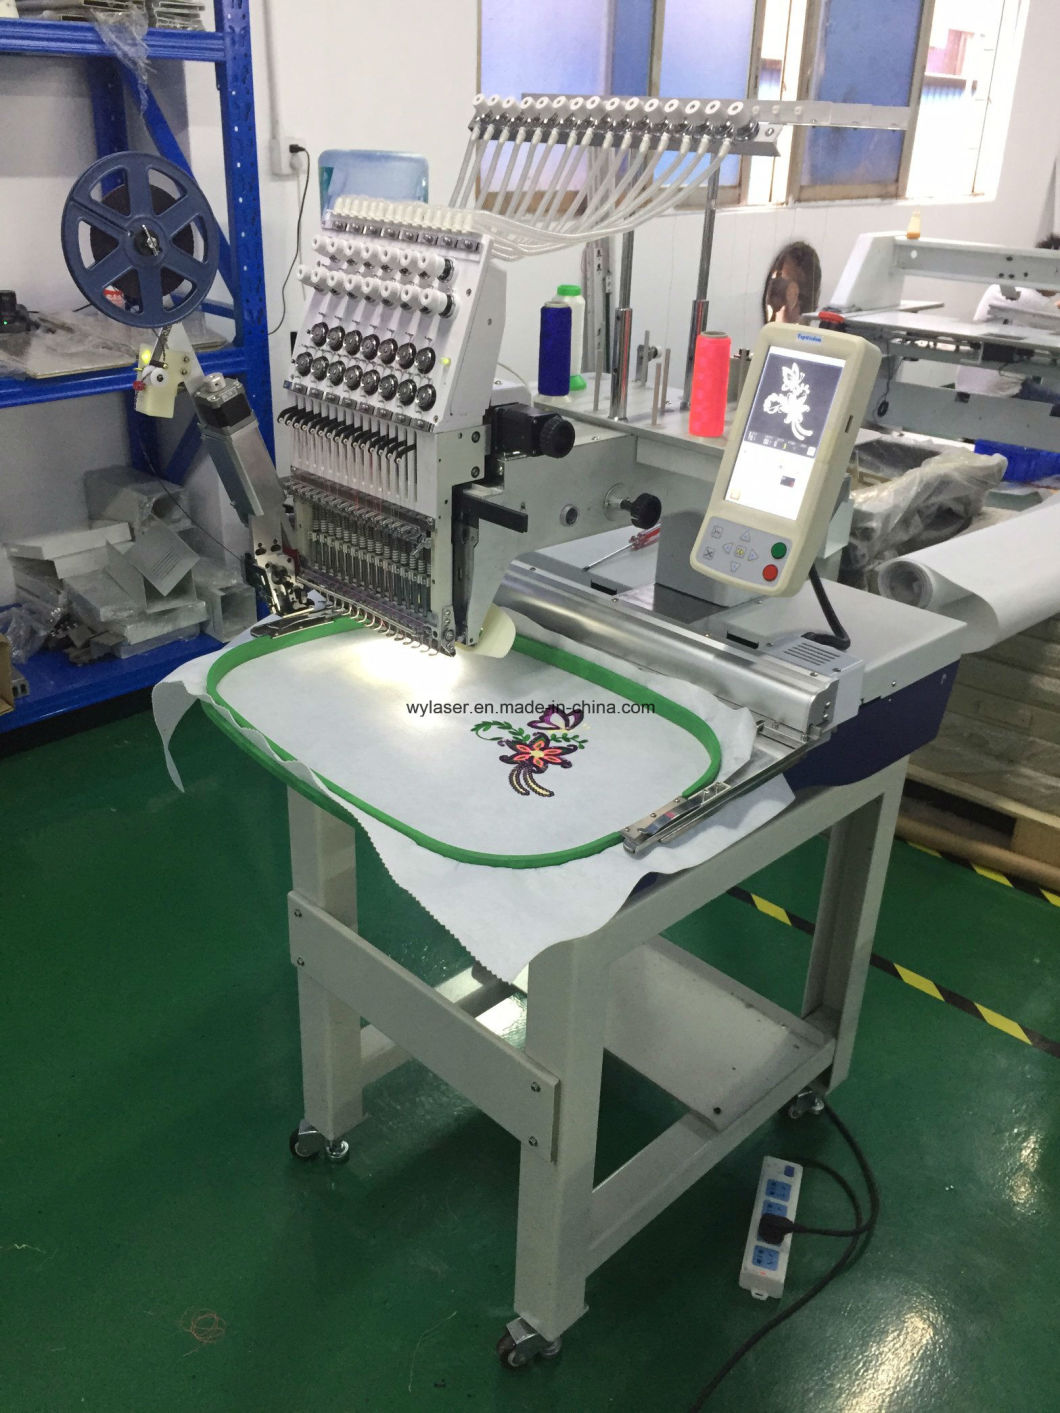 Cheap Price Tajima Type 1 Head Embroidery Machine for Cap Flat T-Shirt Shoes Embroidery China Industrial Sewing Machine Brother Software Sale One Head